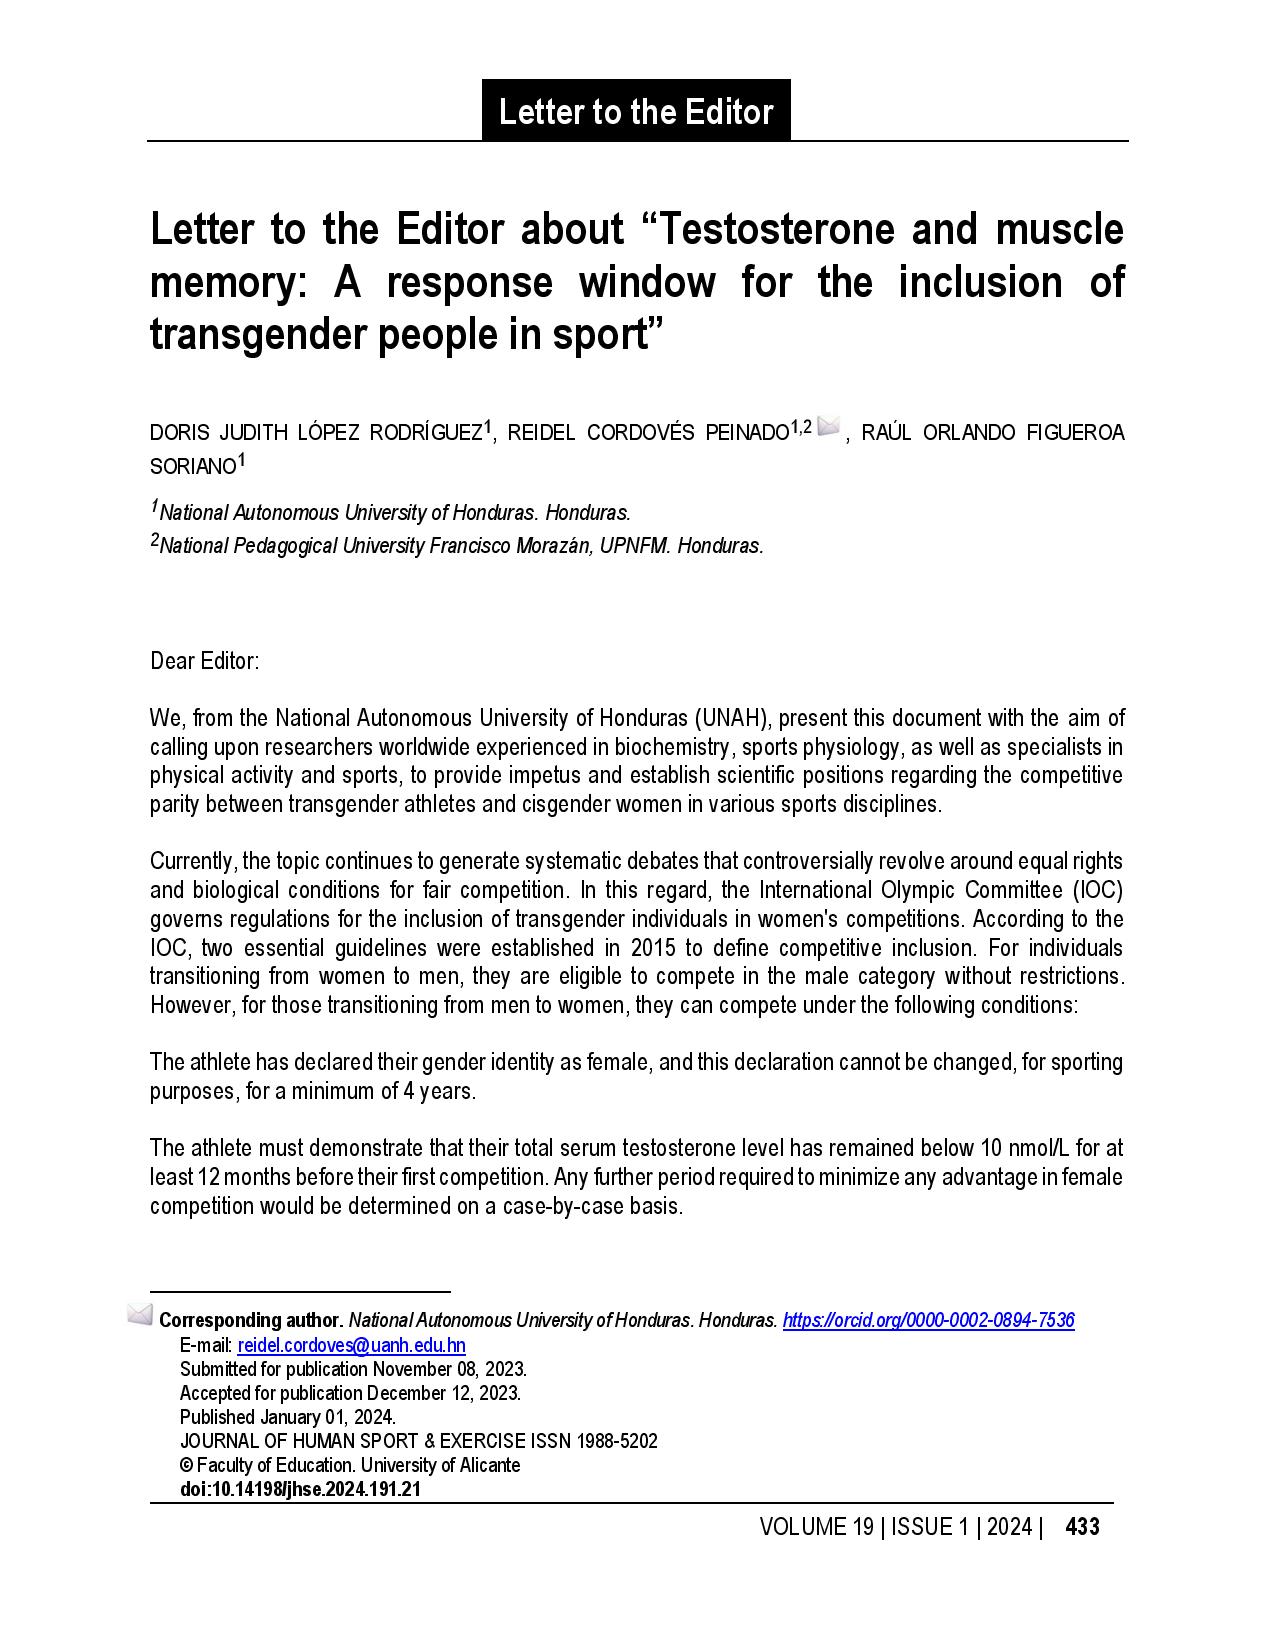 Letter to the Editor about “Testosterone and muscle memory: A response window for the inclusion of transgender people in sport”